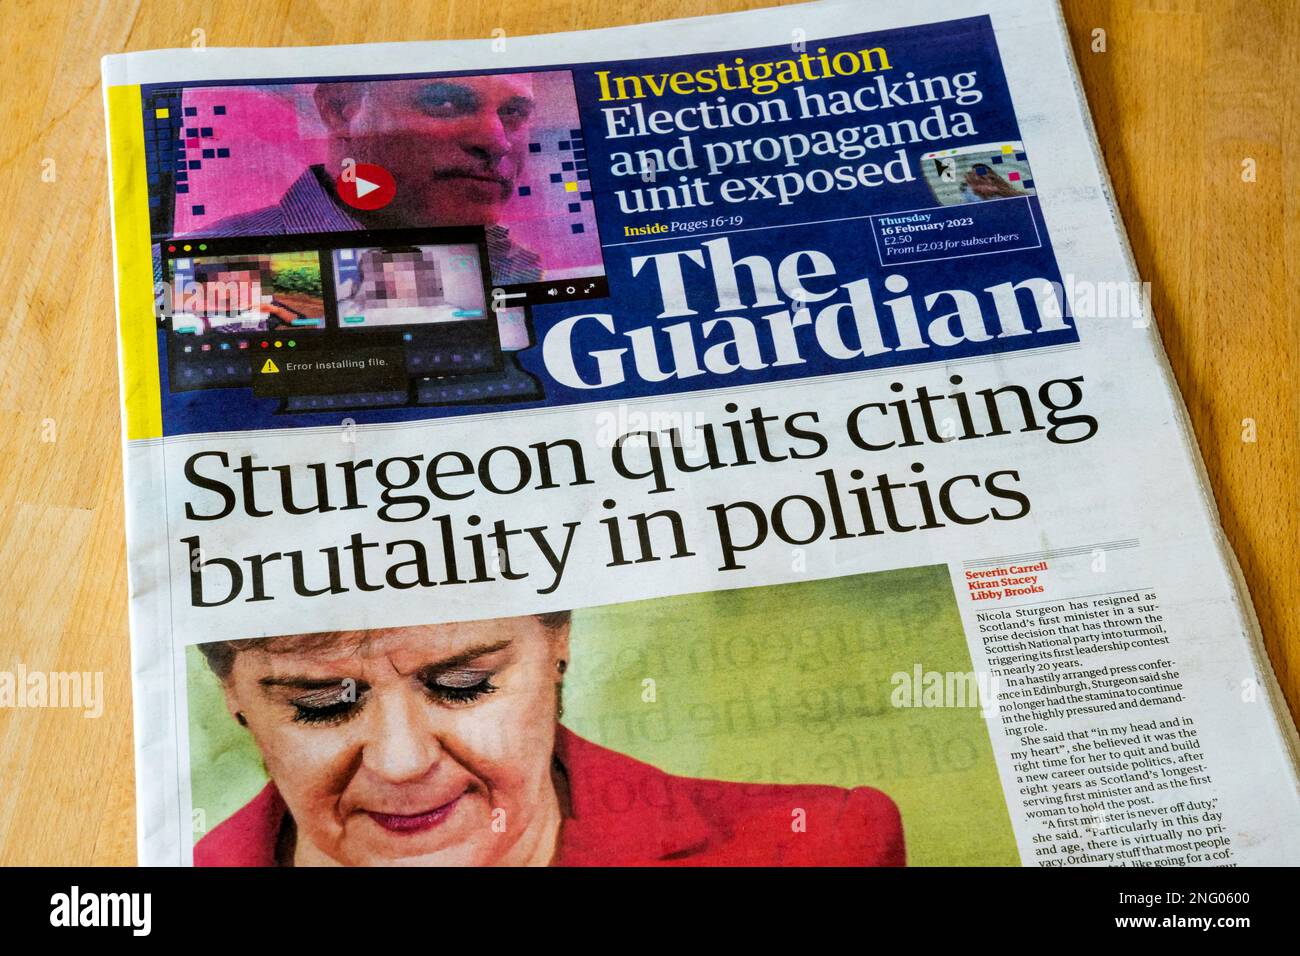 16 Feb 2023.  Sturgeon quits citing brutality in politics. Front page of Guardian after resignation of Nicola Sturgeon as Scottish First Minister. Stock Photo